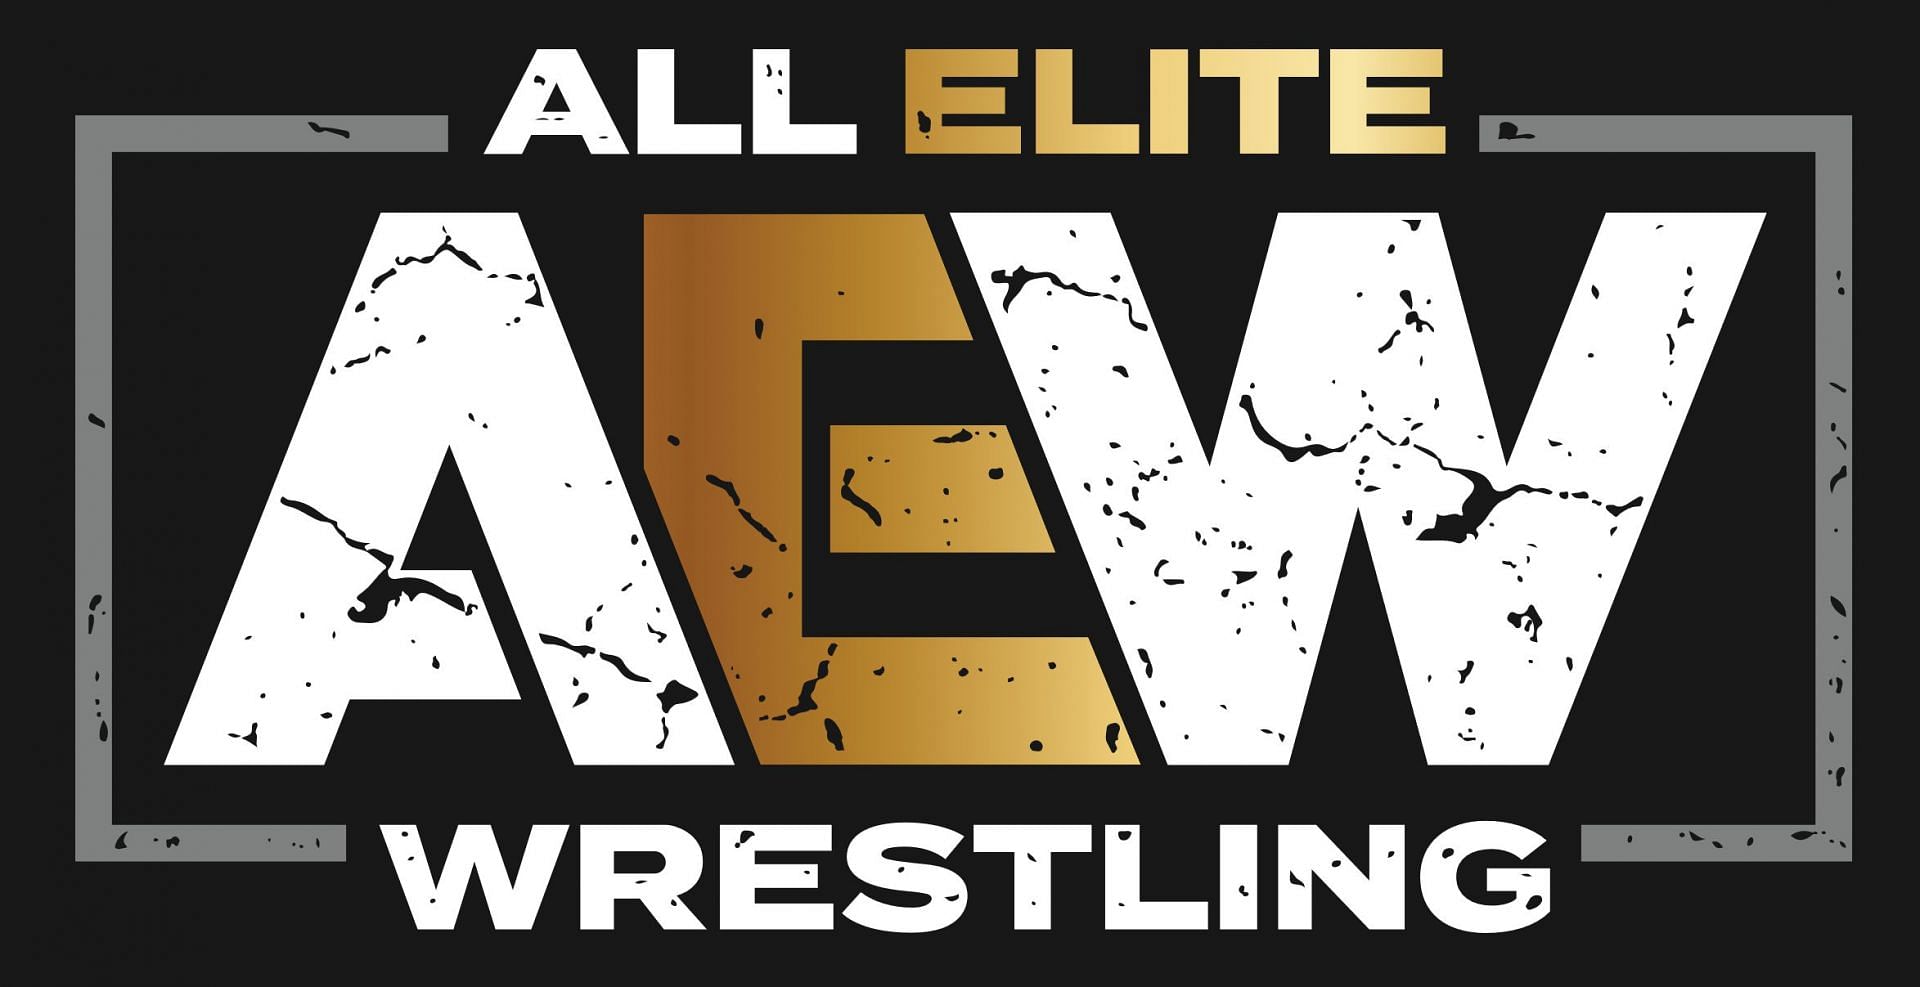 AEW has been going strong for over four years now.